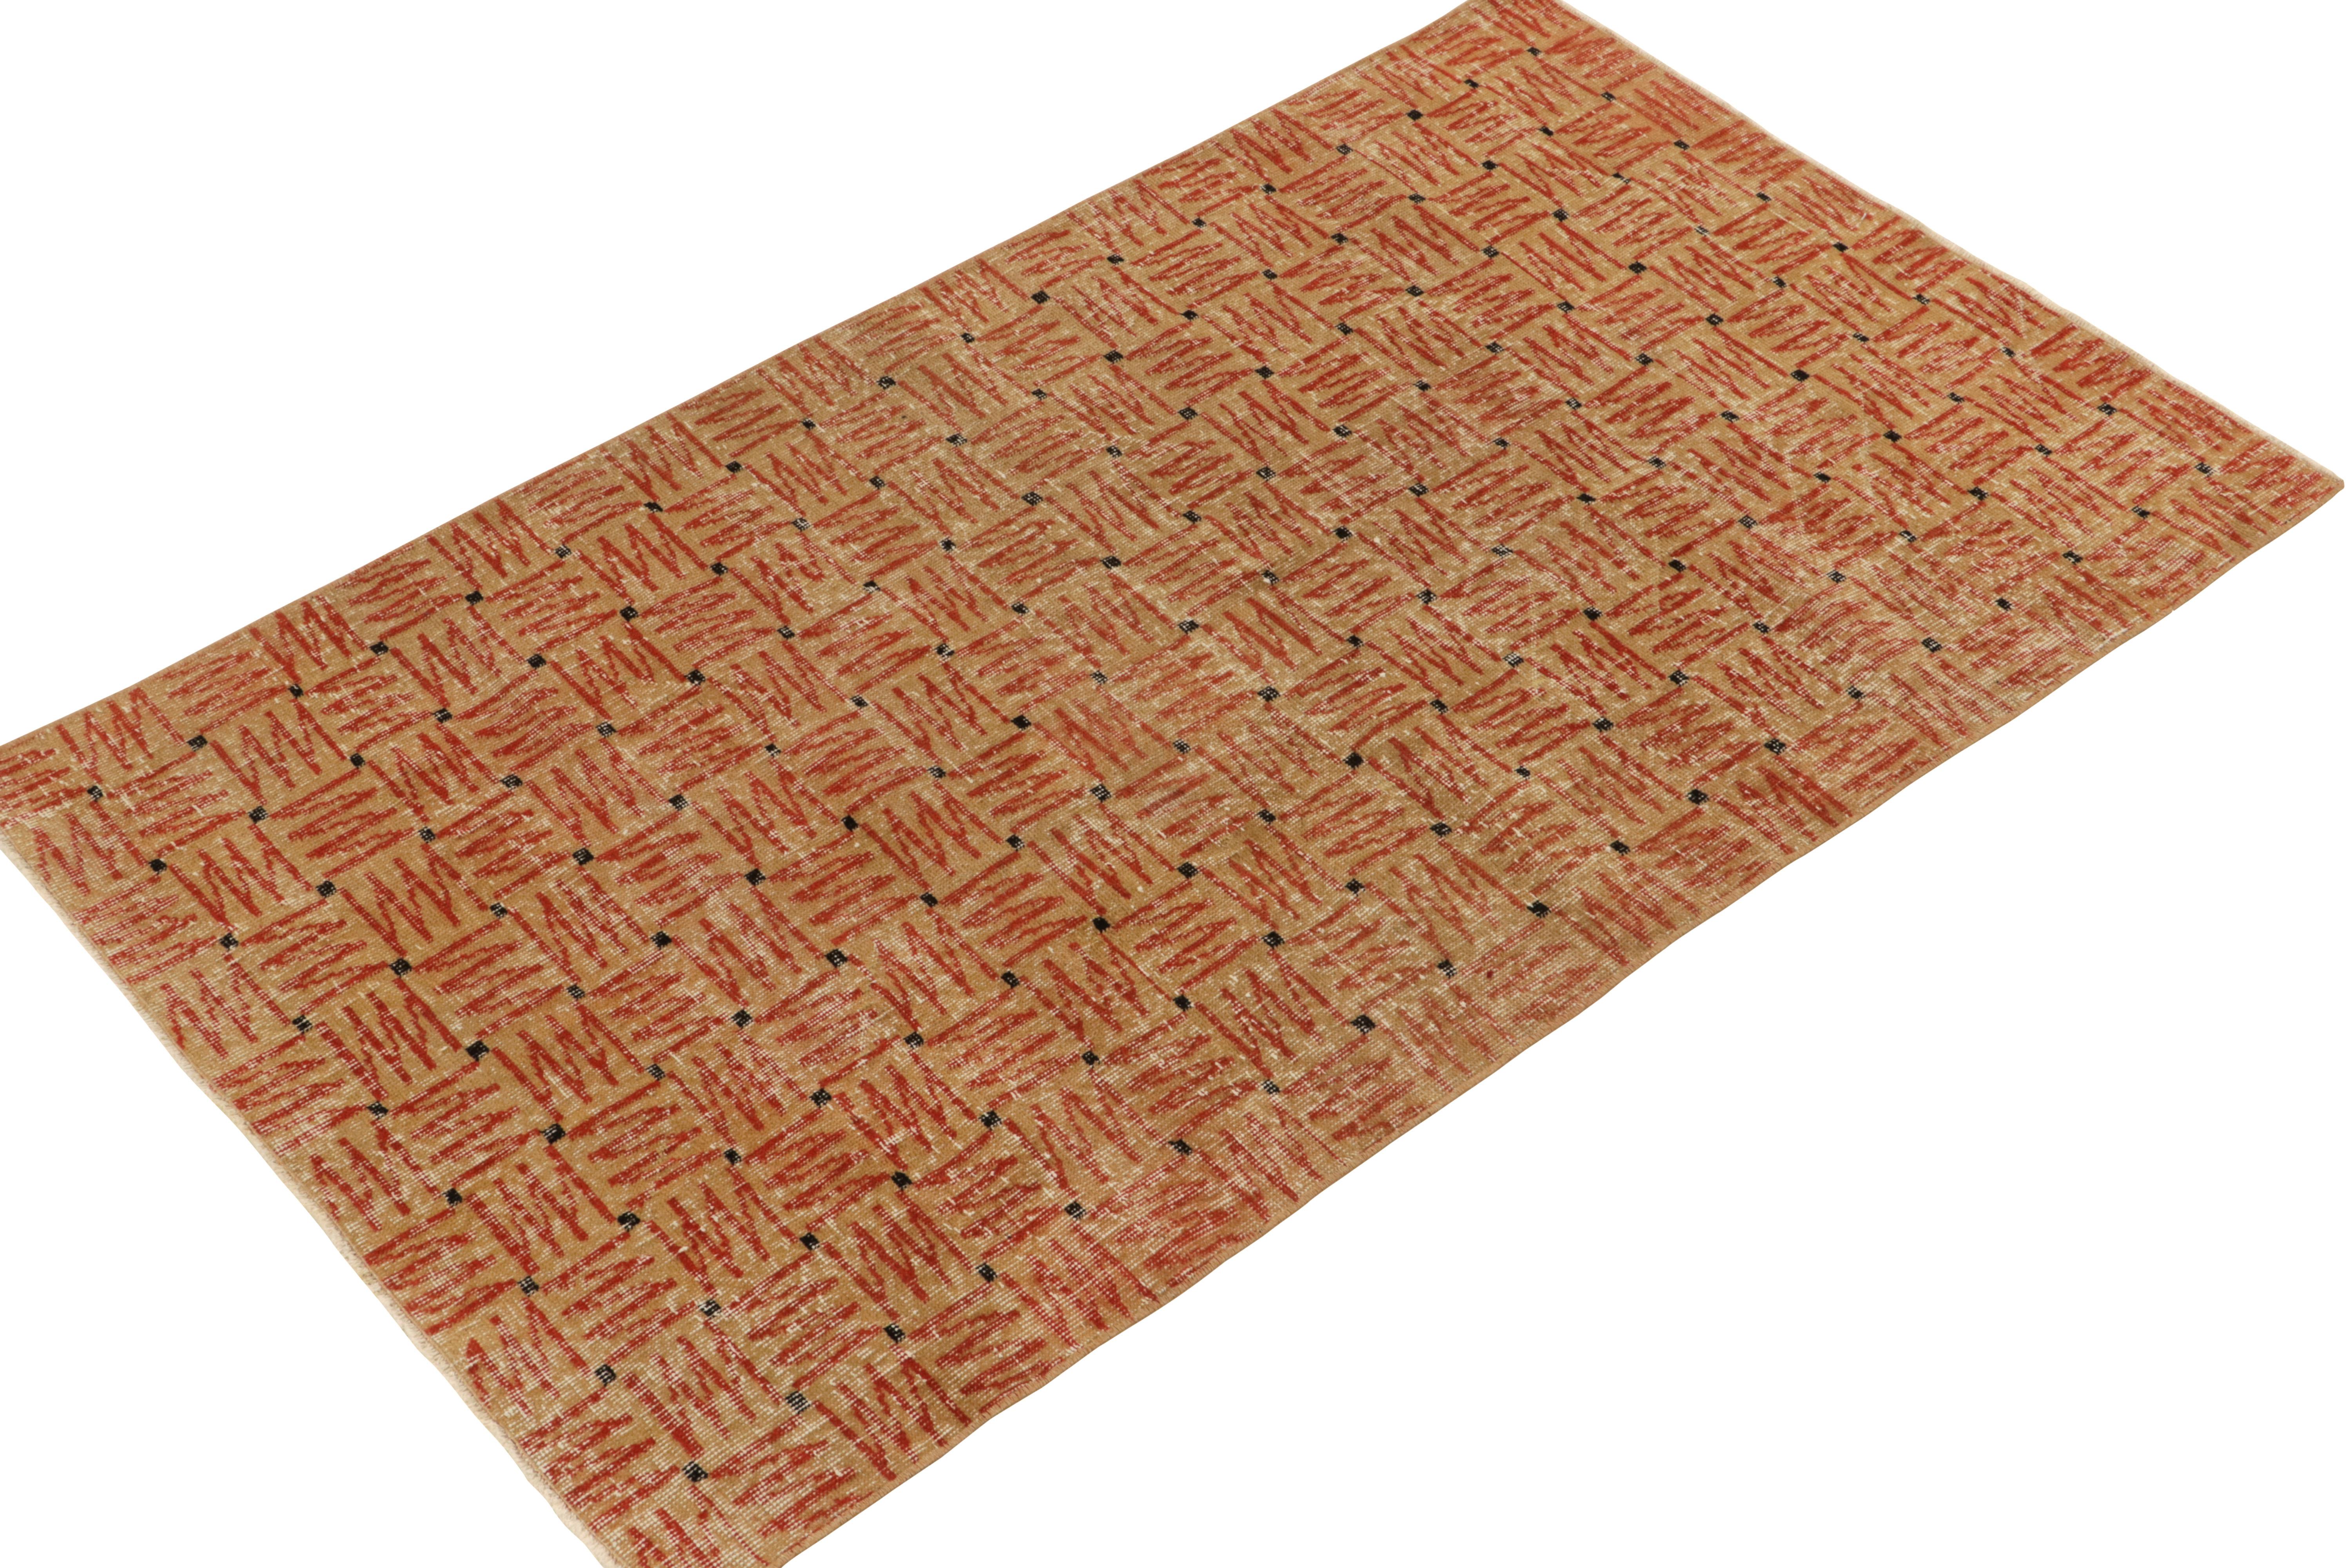 Art Deco 1960s Vintage Deco Rug in Beige-Brown and Red Geometric Patterns, by Rug & Kilim For Sale